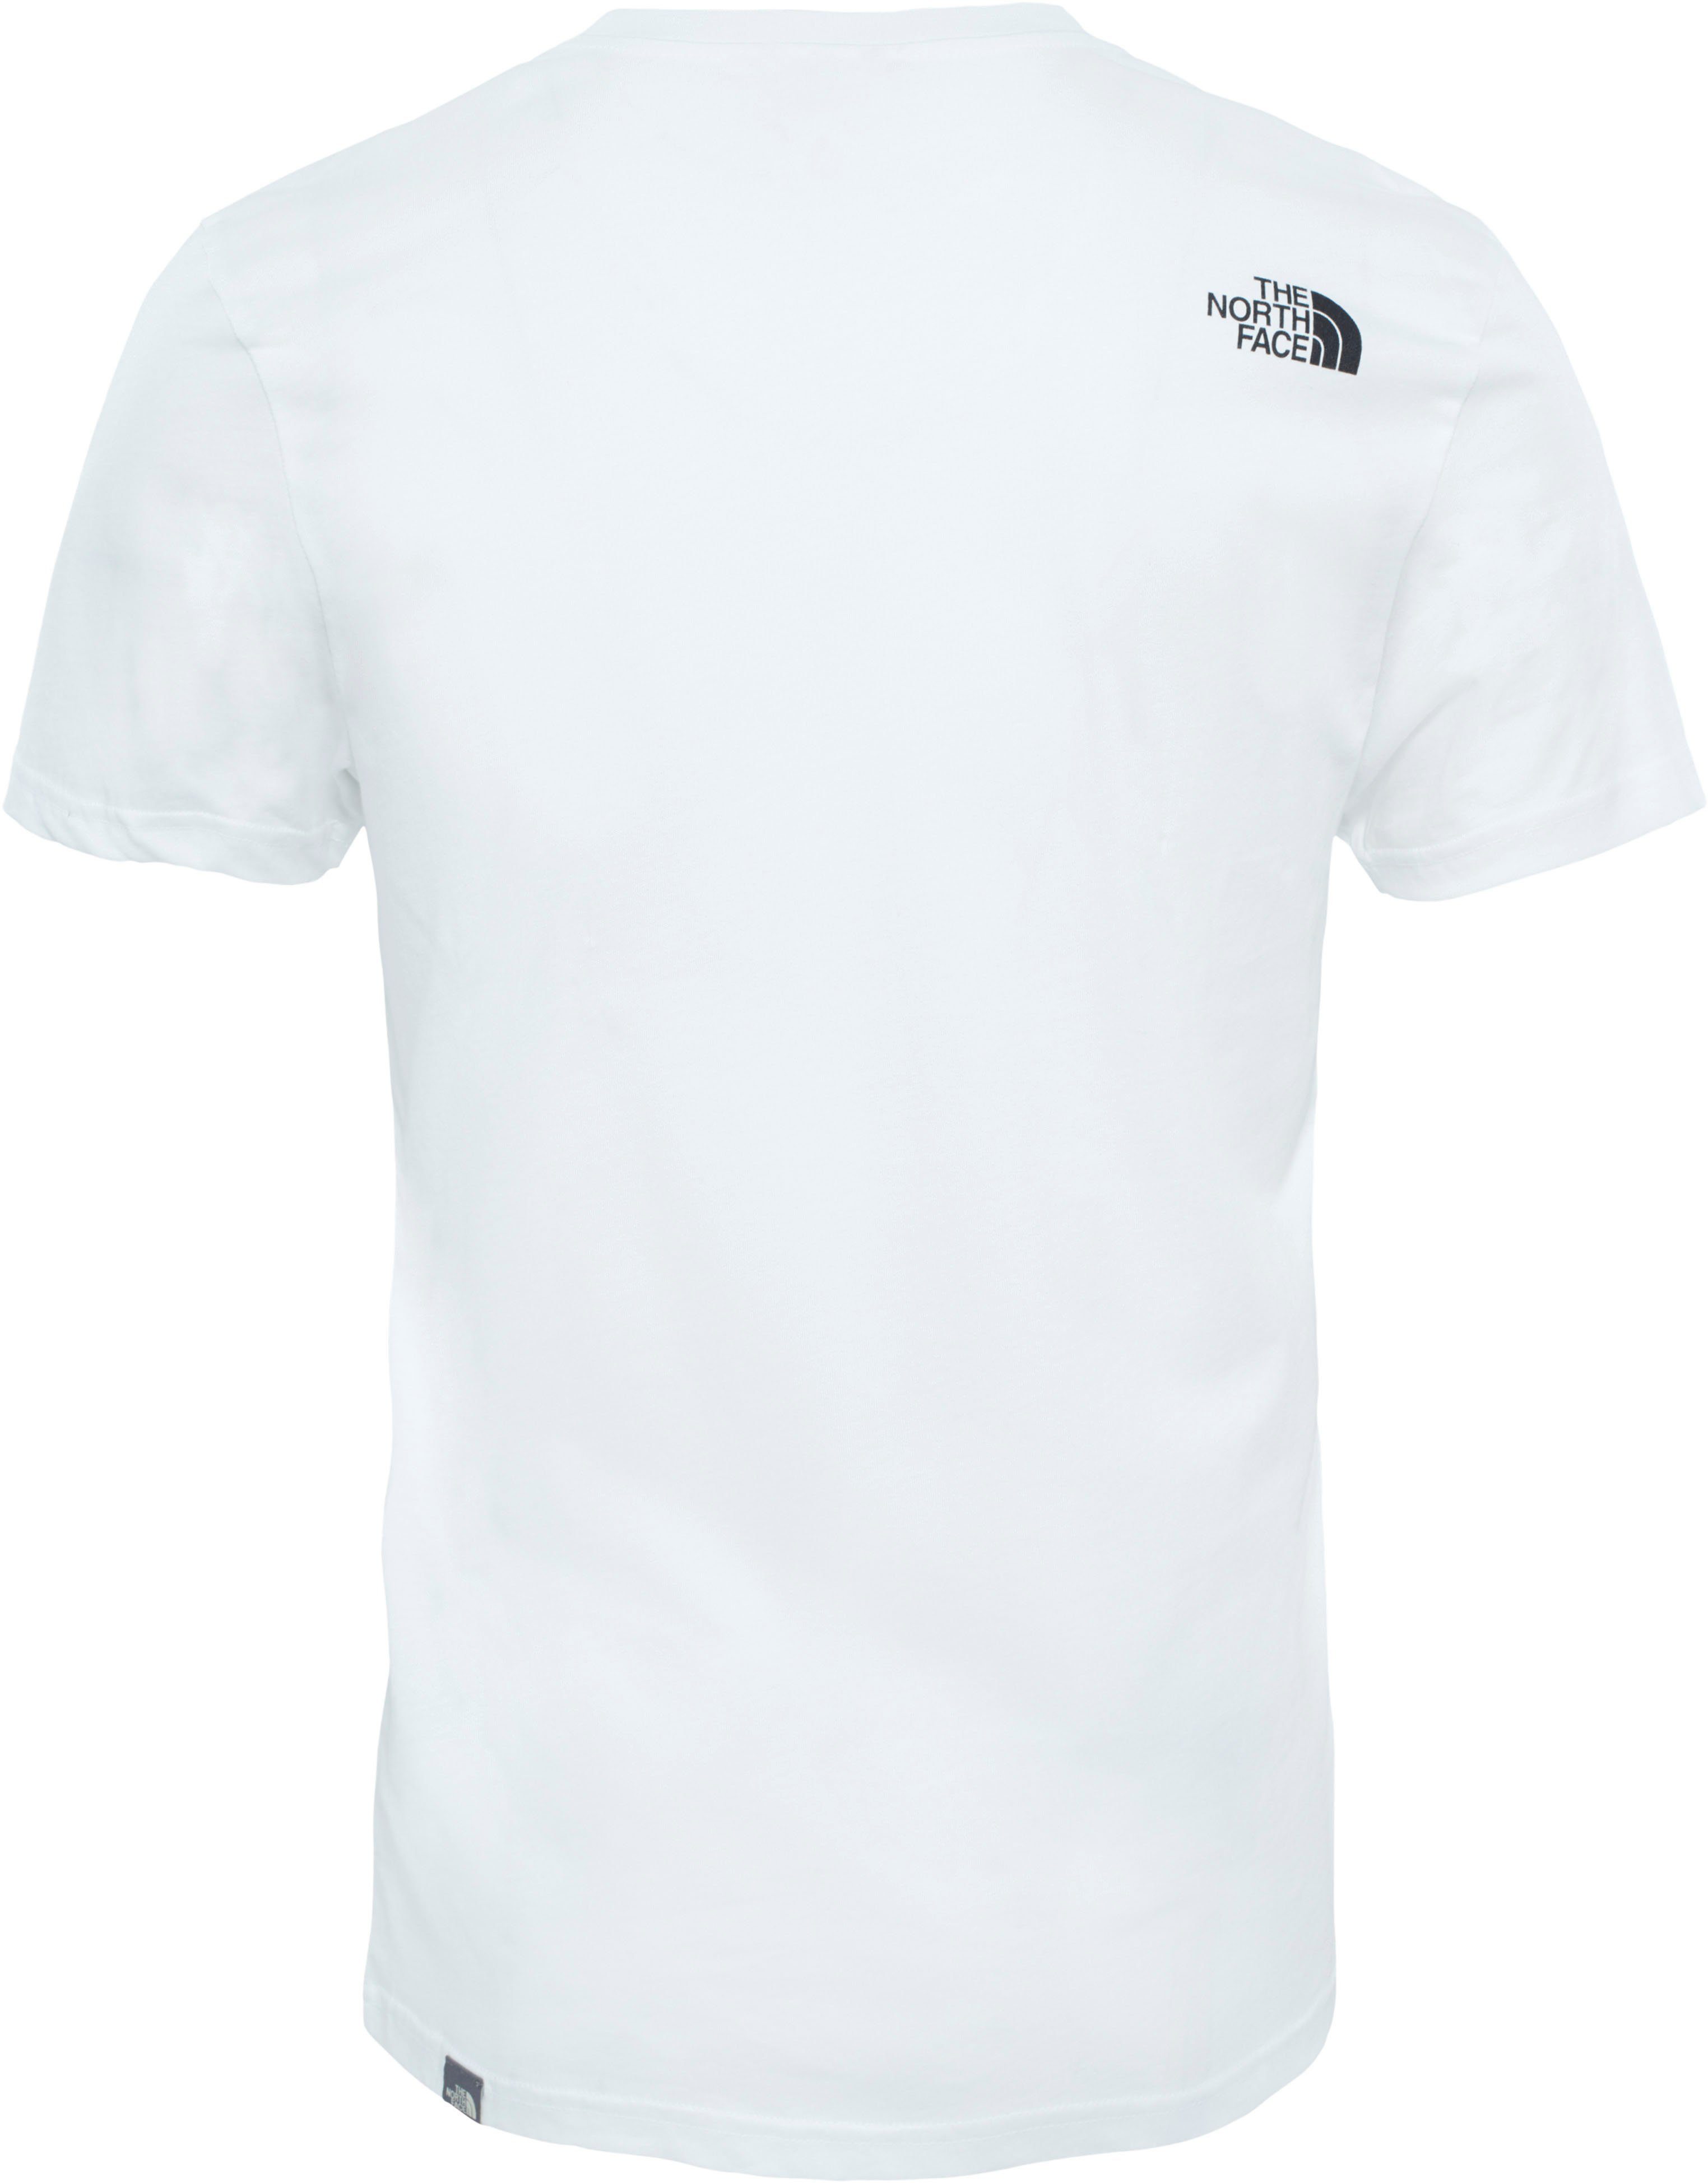 The North Face Funktionsshirt DOME weiß SIMPLE